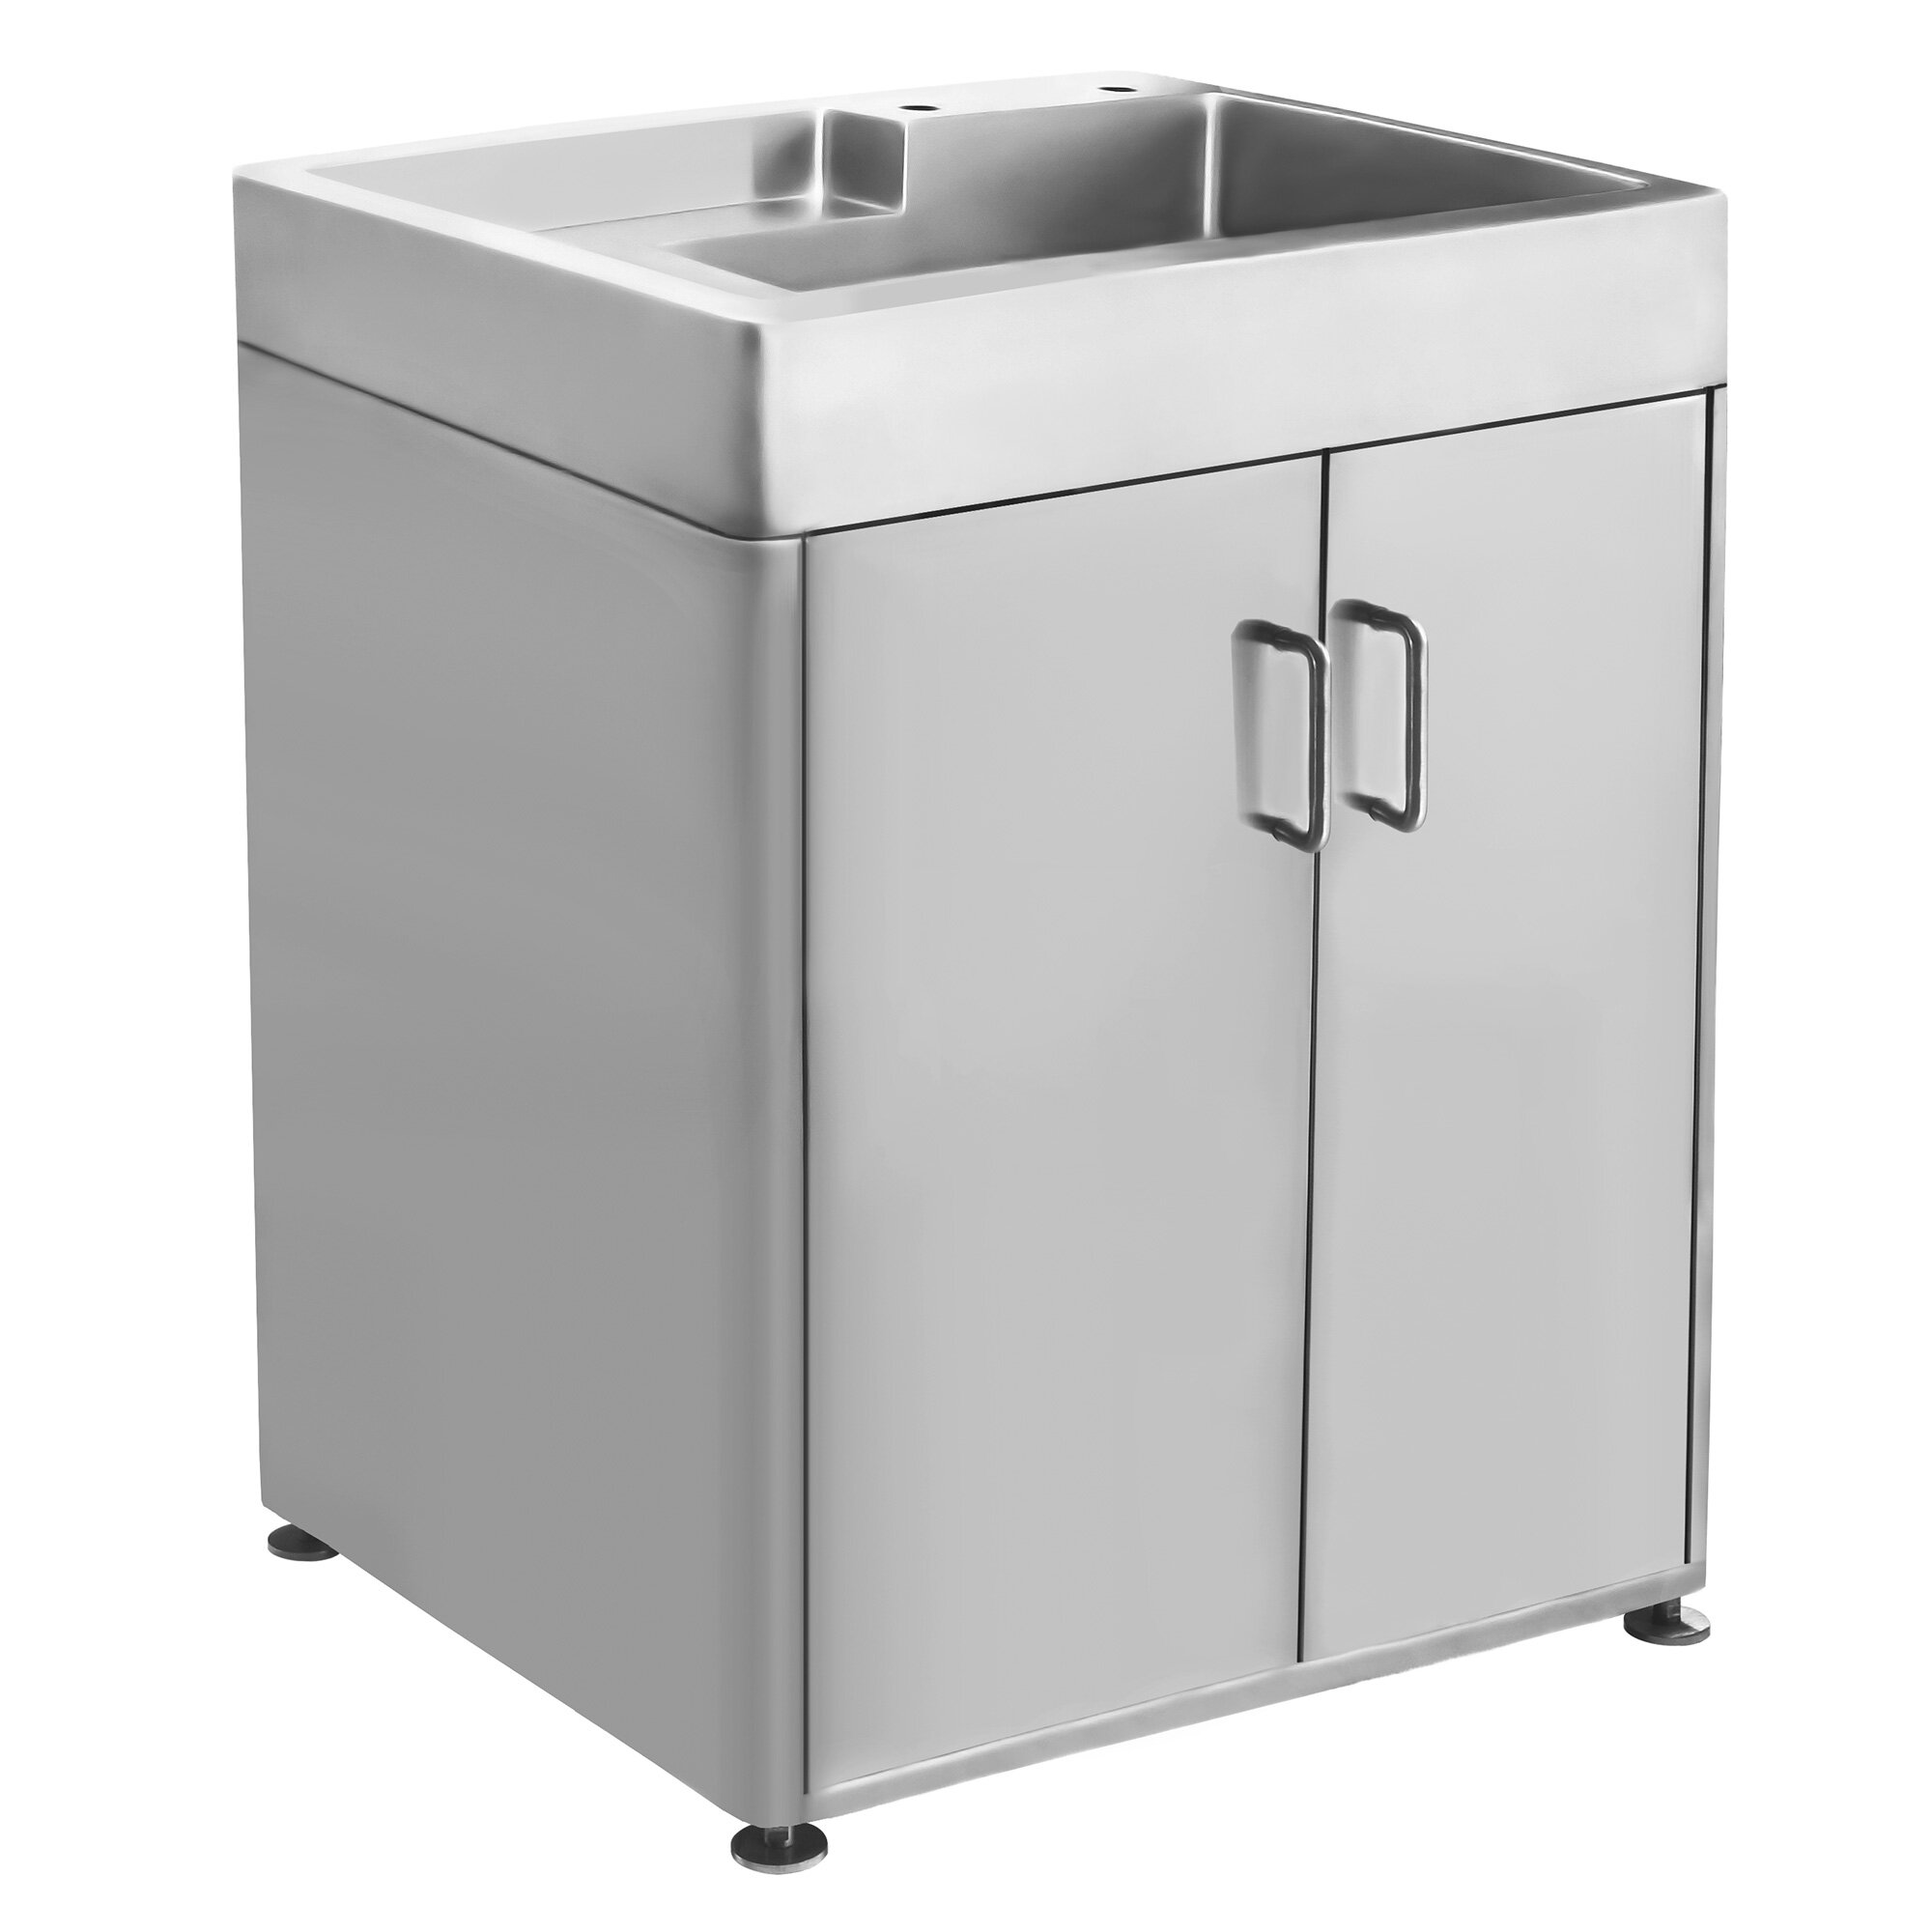 Tuhome Napoles Freestanding Sink - White/Light Grey Engineered Wood